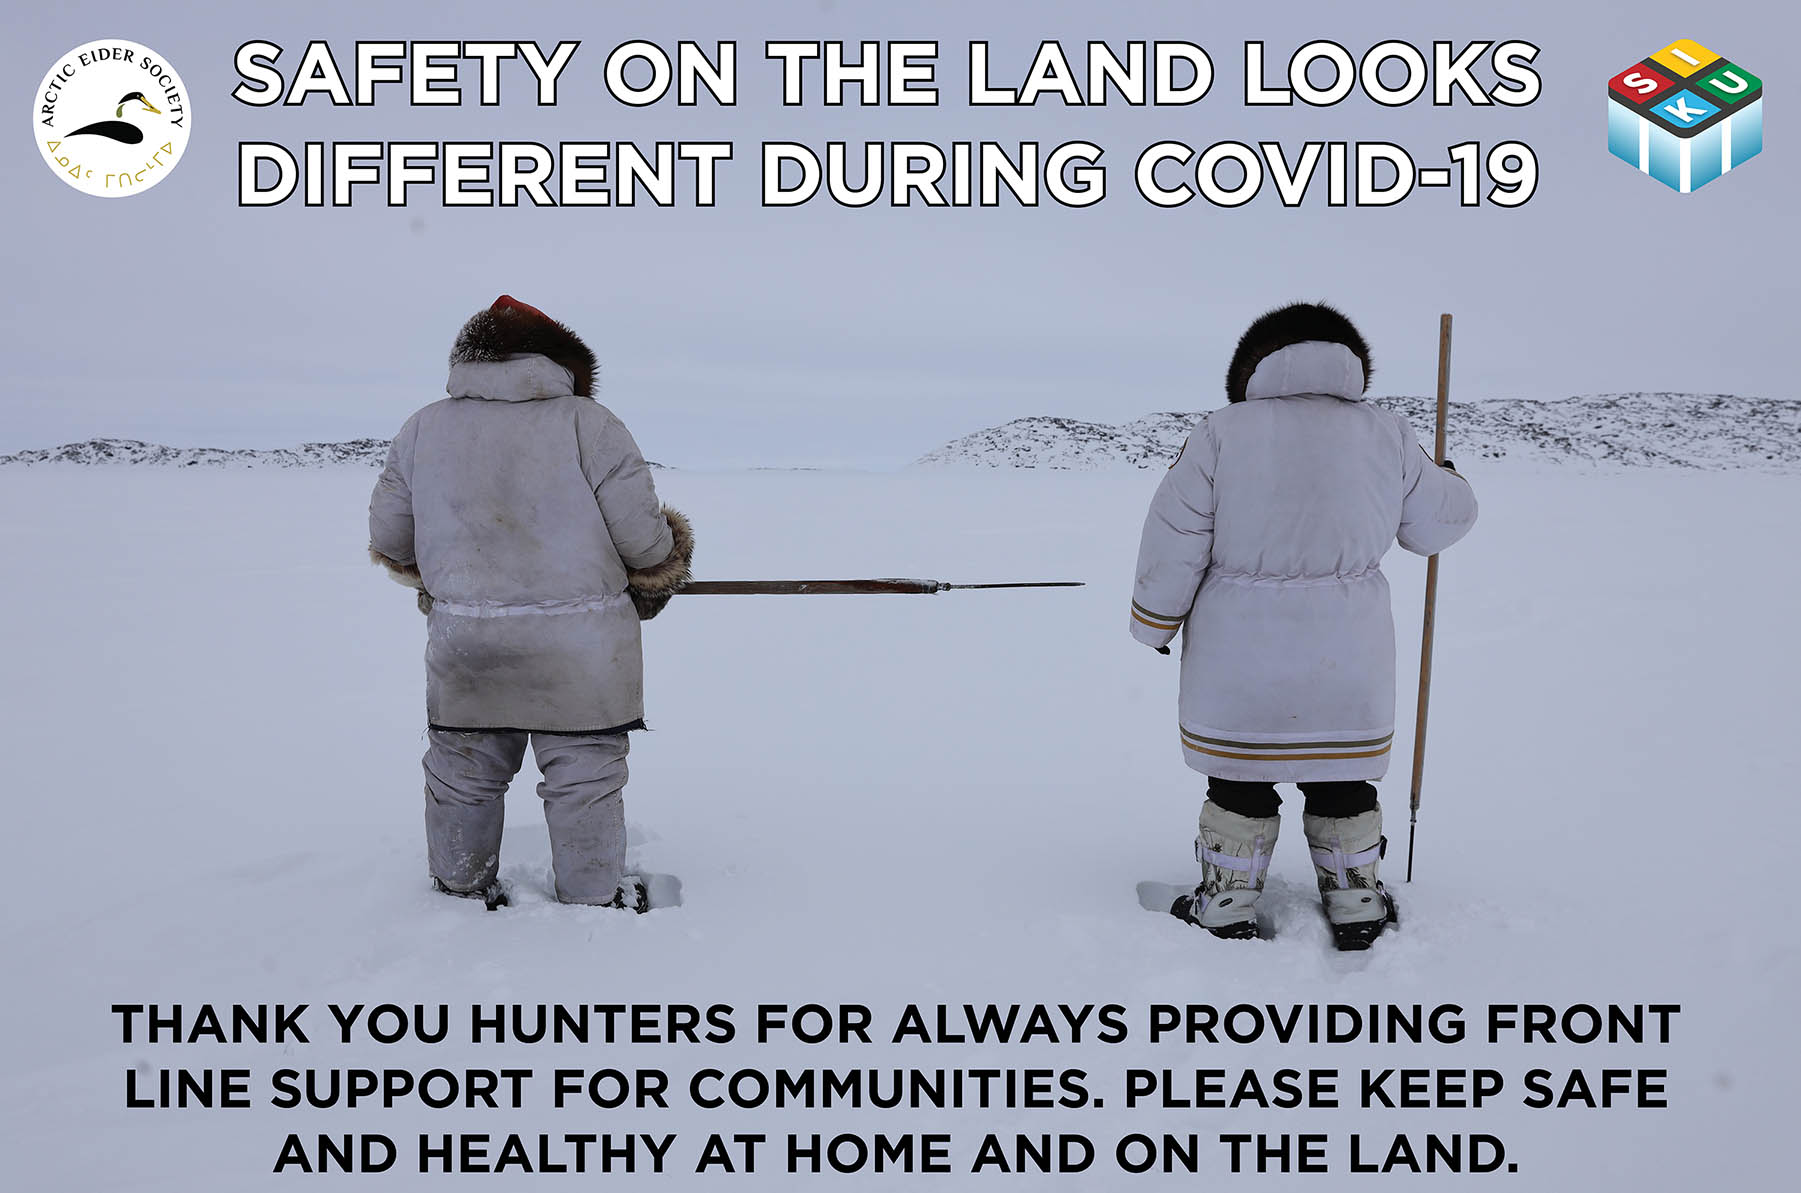 Thank you hunters! Stay safe out there